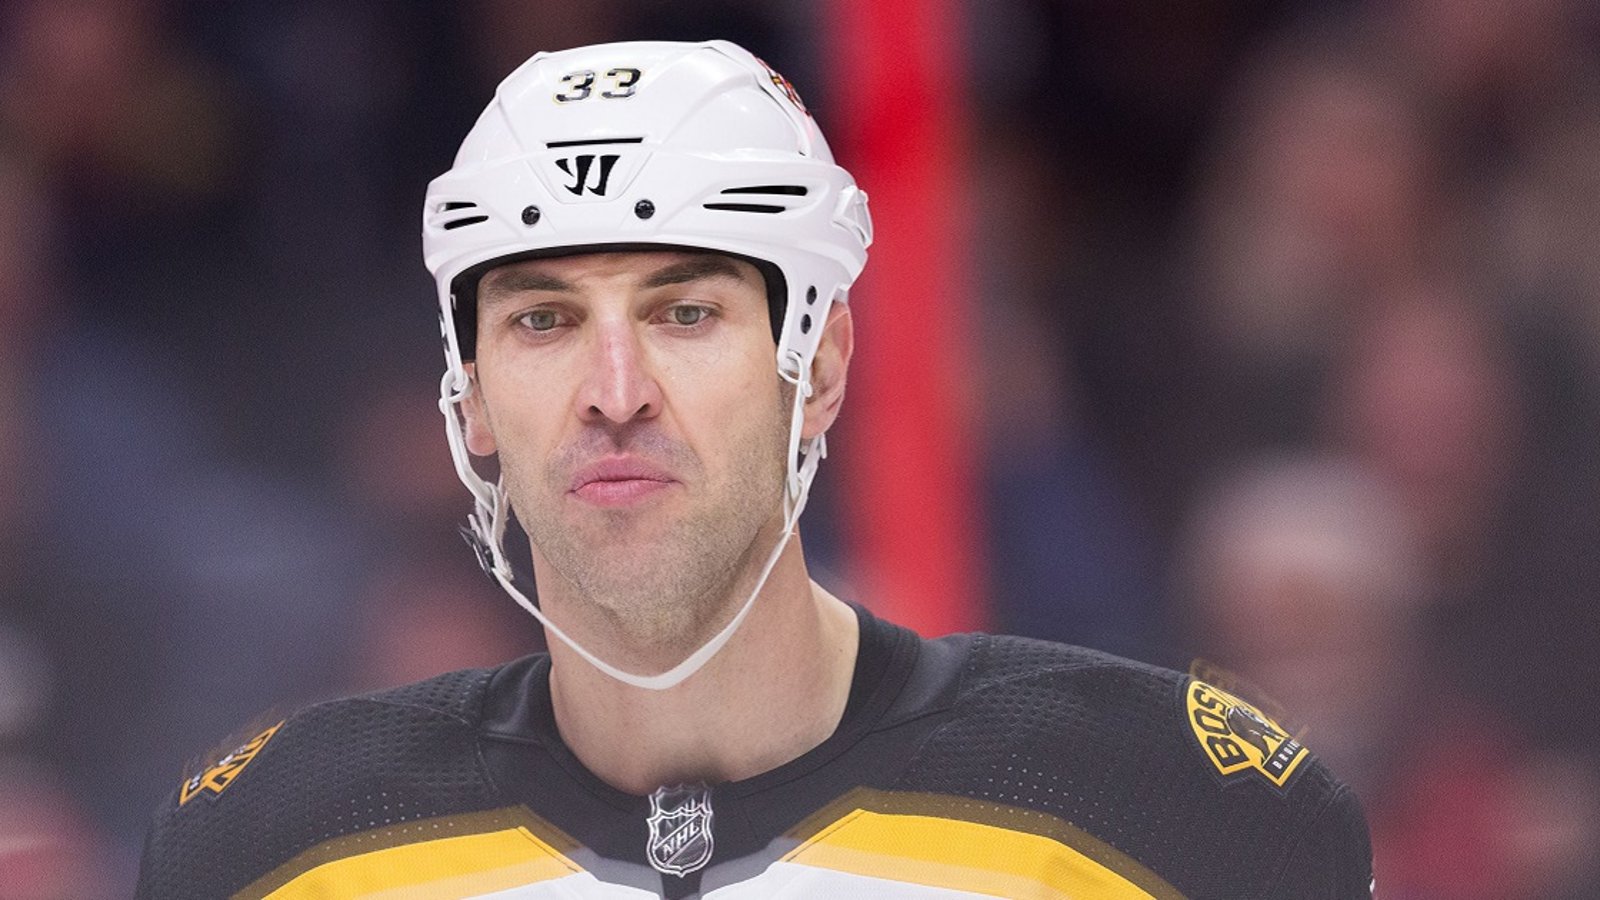 Rumor: Chara 'far apart' on deal with the Bruins, 3 new teams in the mix.